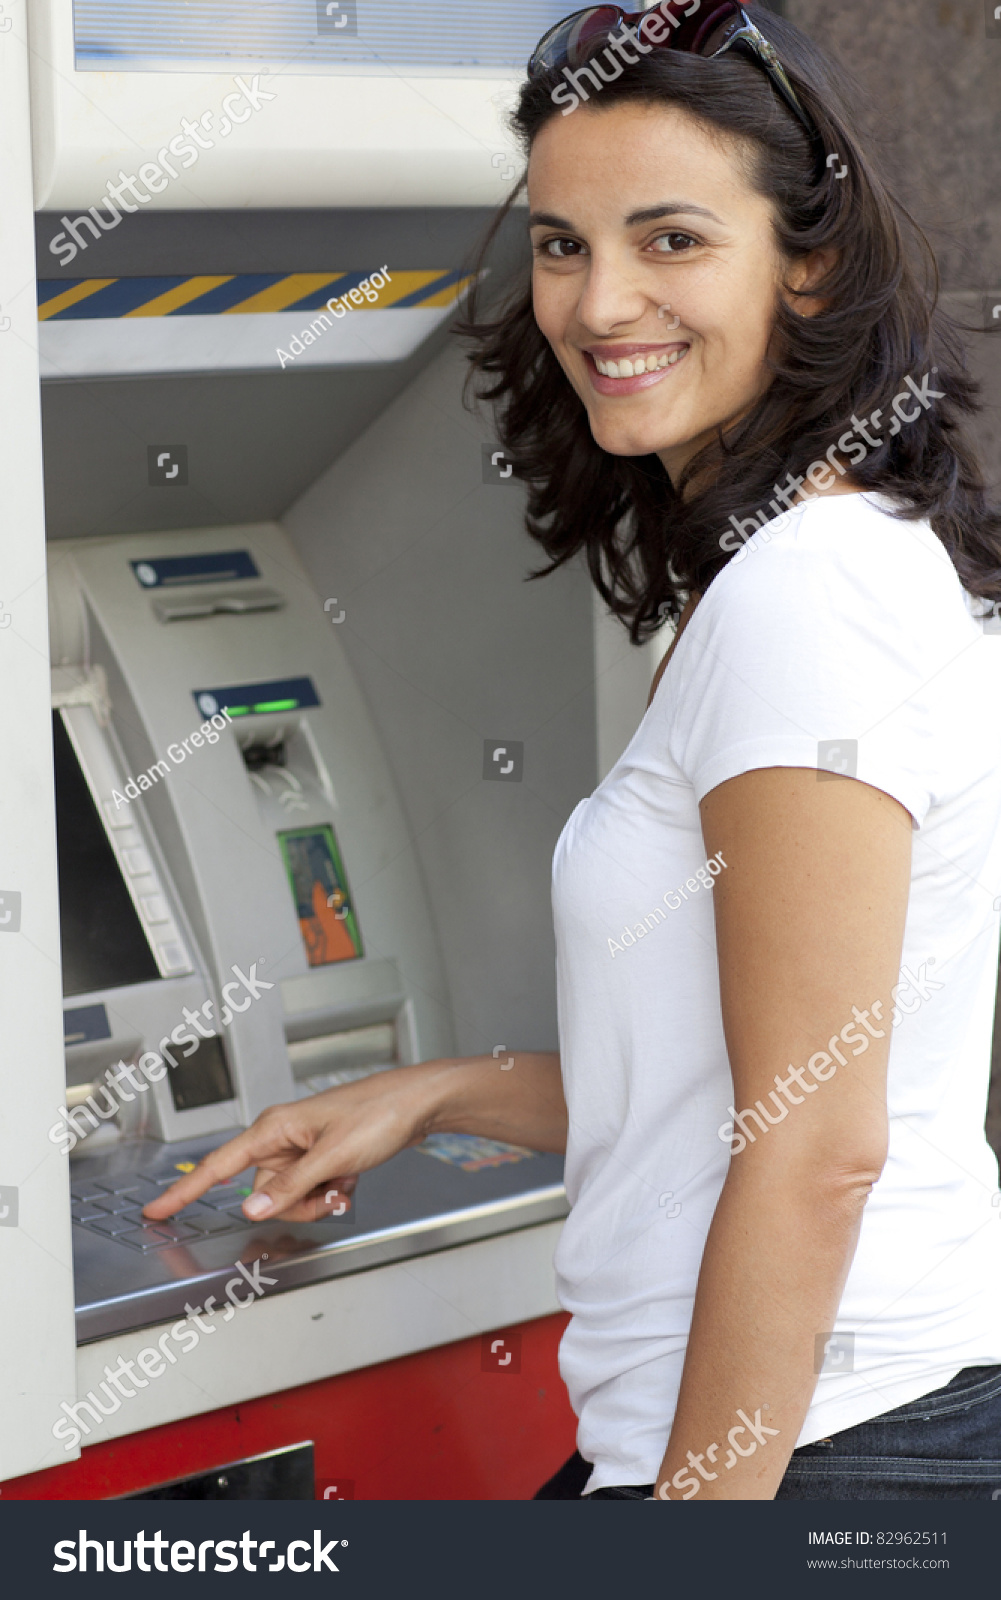 http://image.shutterstock.com/z/stock-photo-good-looking-latin-woman-enters-the-pin-number-at-the-atm-82962511.jpg